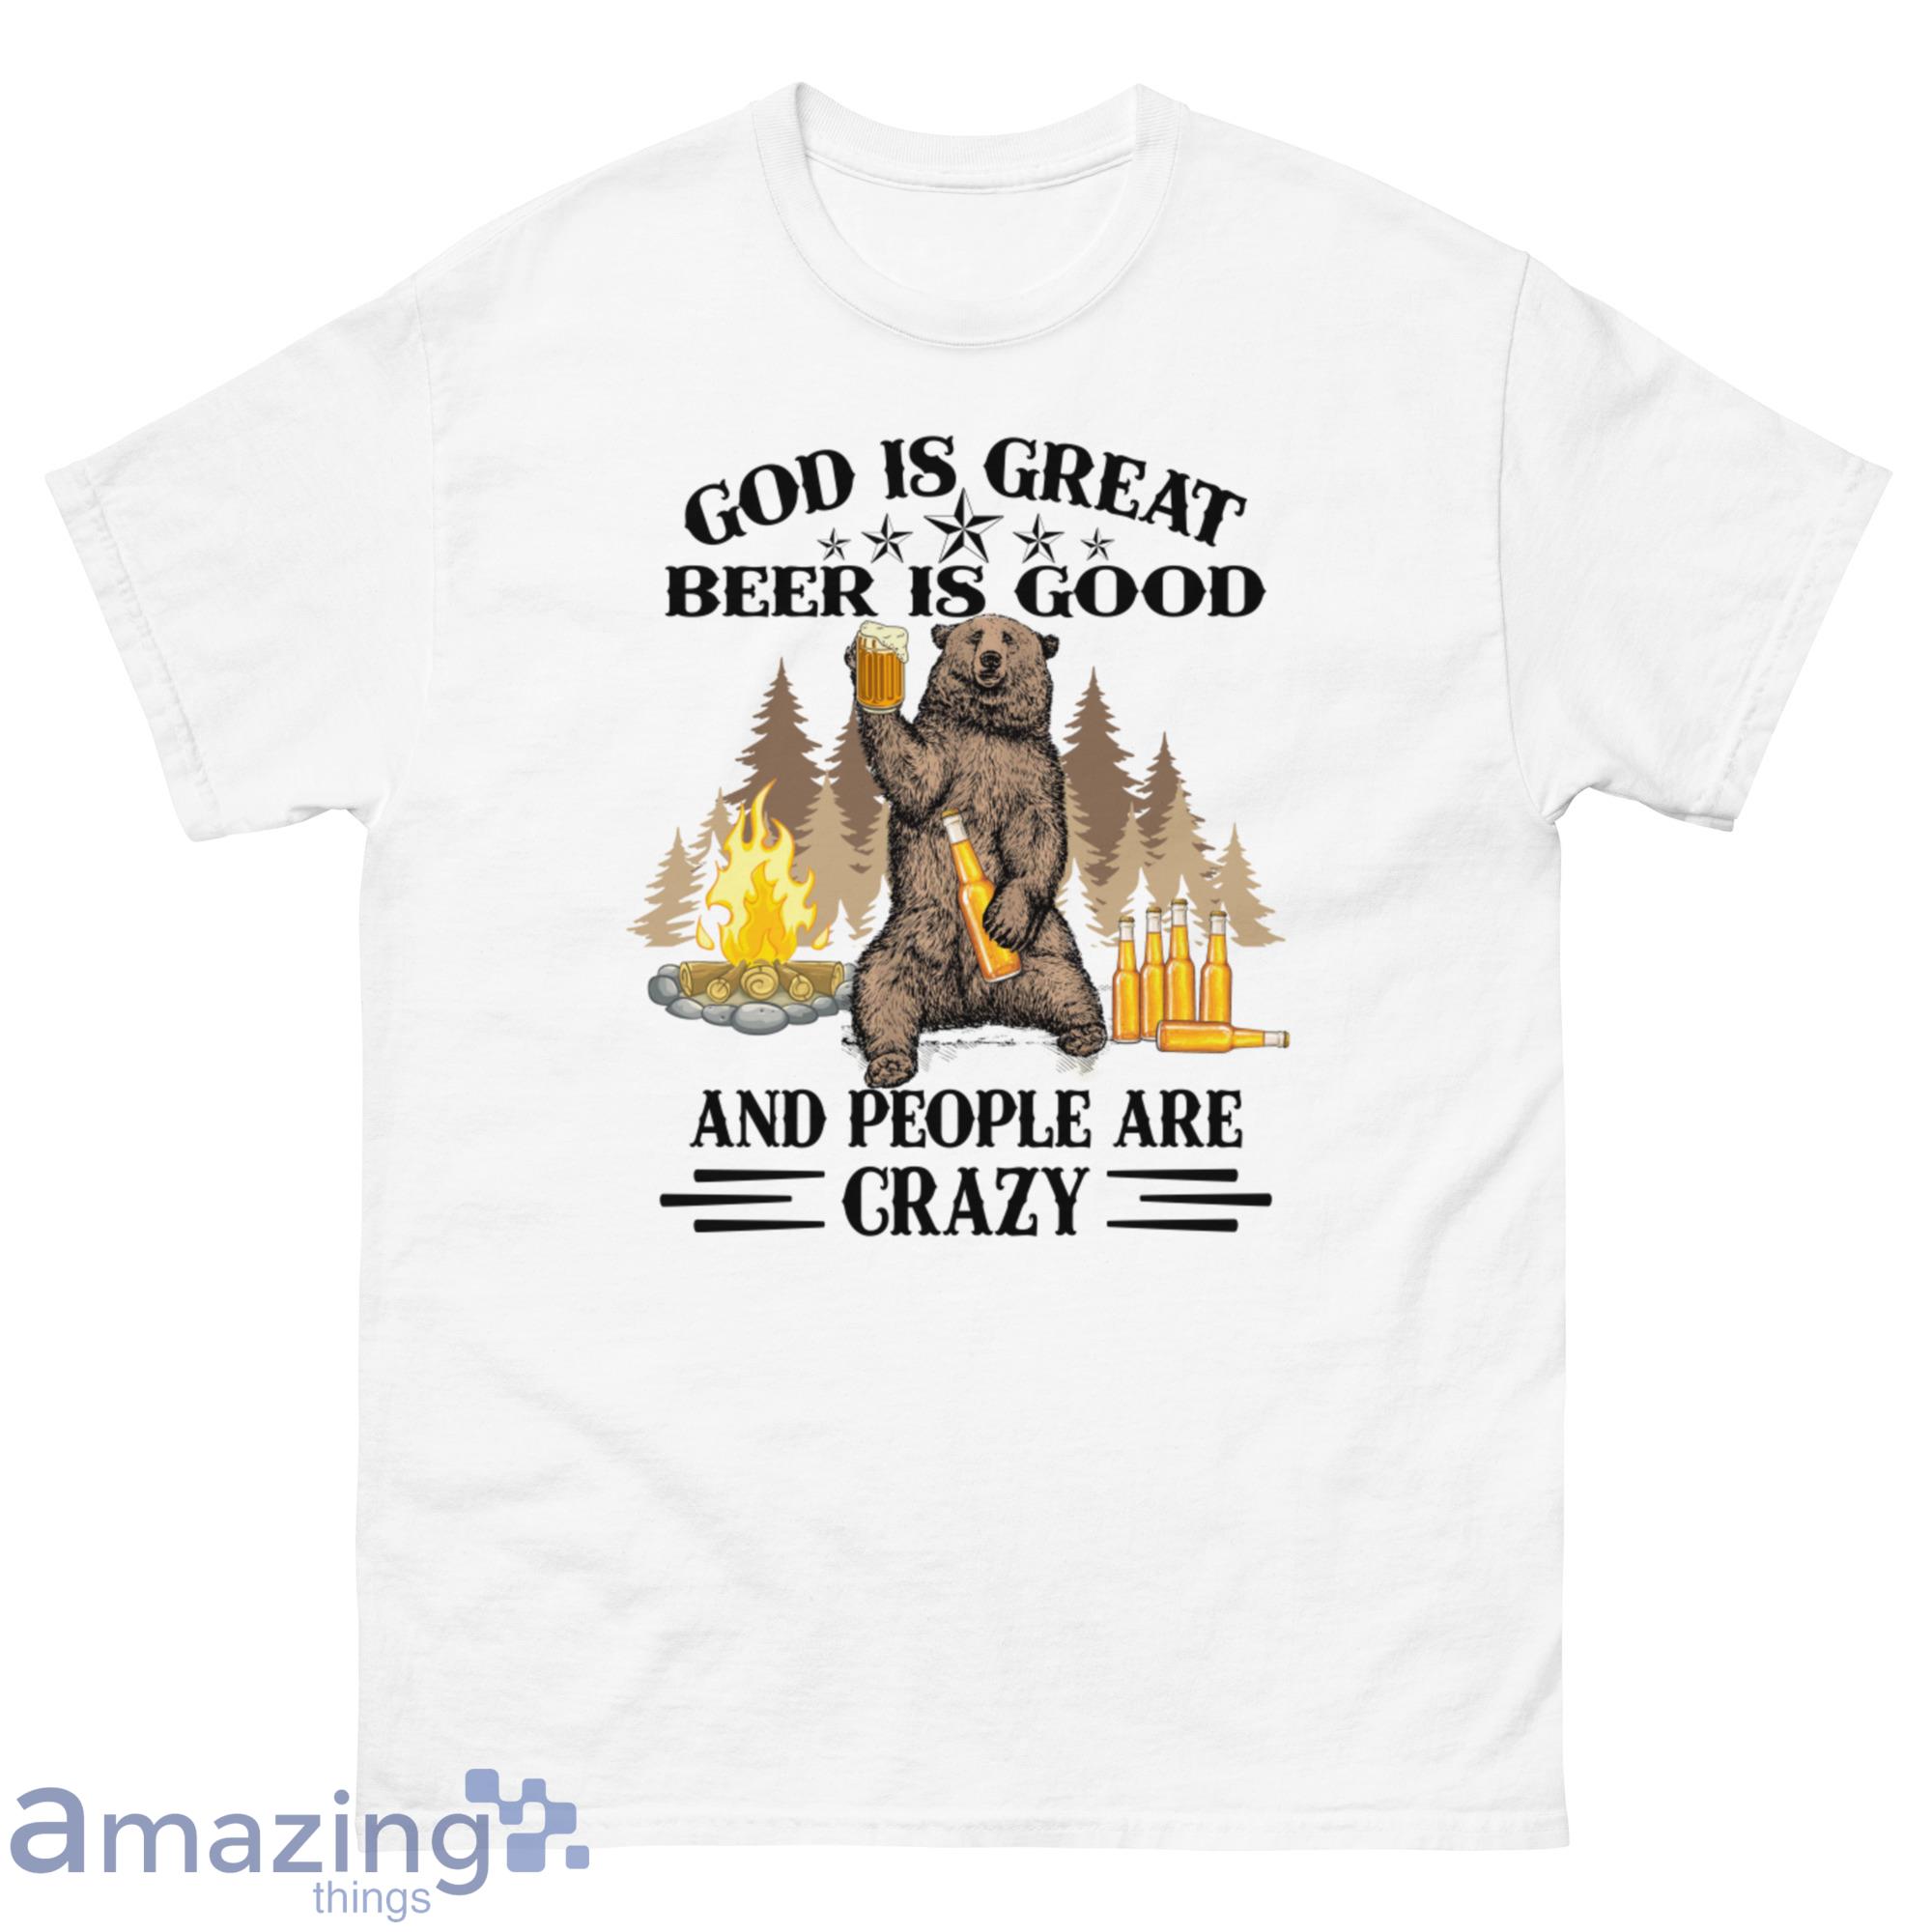 Bear Drink Beer God Is Great Beer Is Good, And People Are Crazy Shirt - G500 Men’s Classic T-Shirt-1